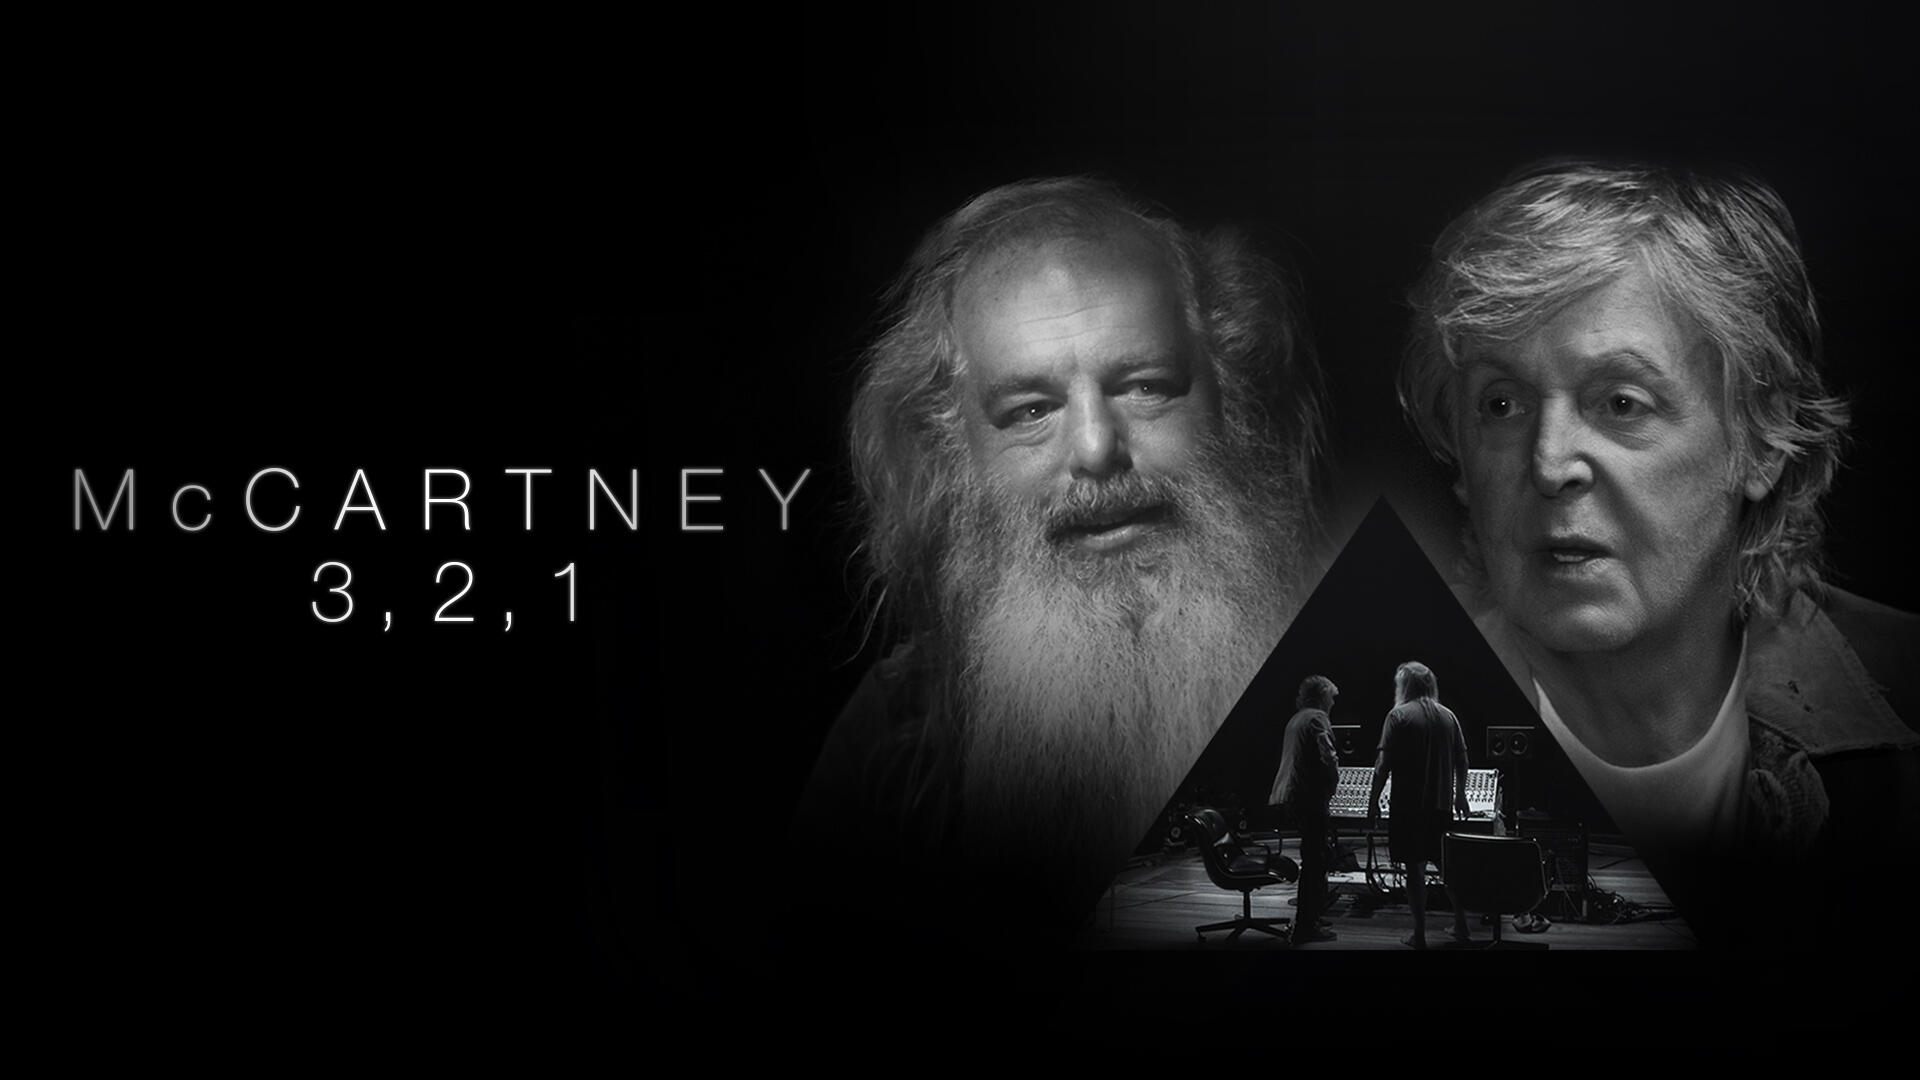 McCartney 3,2,1 -- Paul McCartney sits down for a rare, in-depth, one on one with legendary producer Rick Rubin to discuss his groundbreaking work with The Beatles, the emblematic 70s arena rock of Wings and his 50 years and counting as a solo artist. In this six-episode series that explores music and creativity in a unique and revelatory manner, join Paul and Rick for an intimate conversation about the songwriting, influences, and personal relationships that informed the iconic songs that have served as the soundtracks of our lives. Paul McCartney and Rick Rubin, shown. (Courtesy of Hulu)